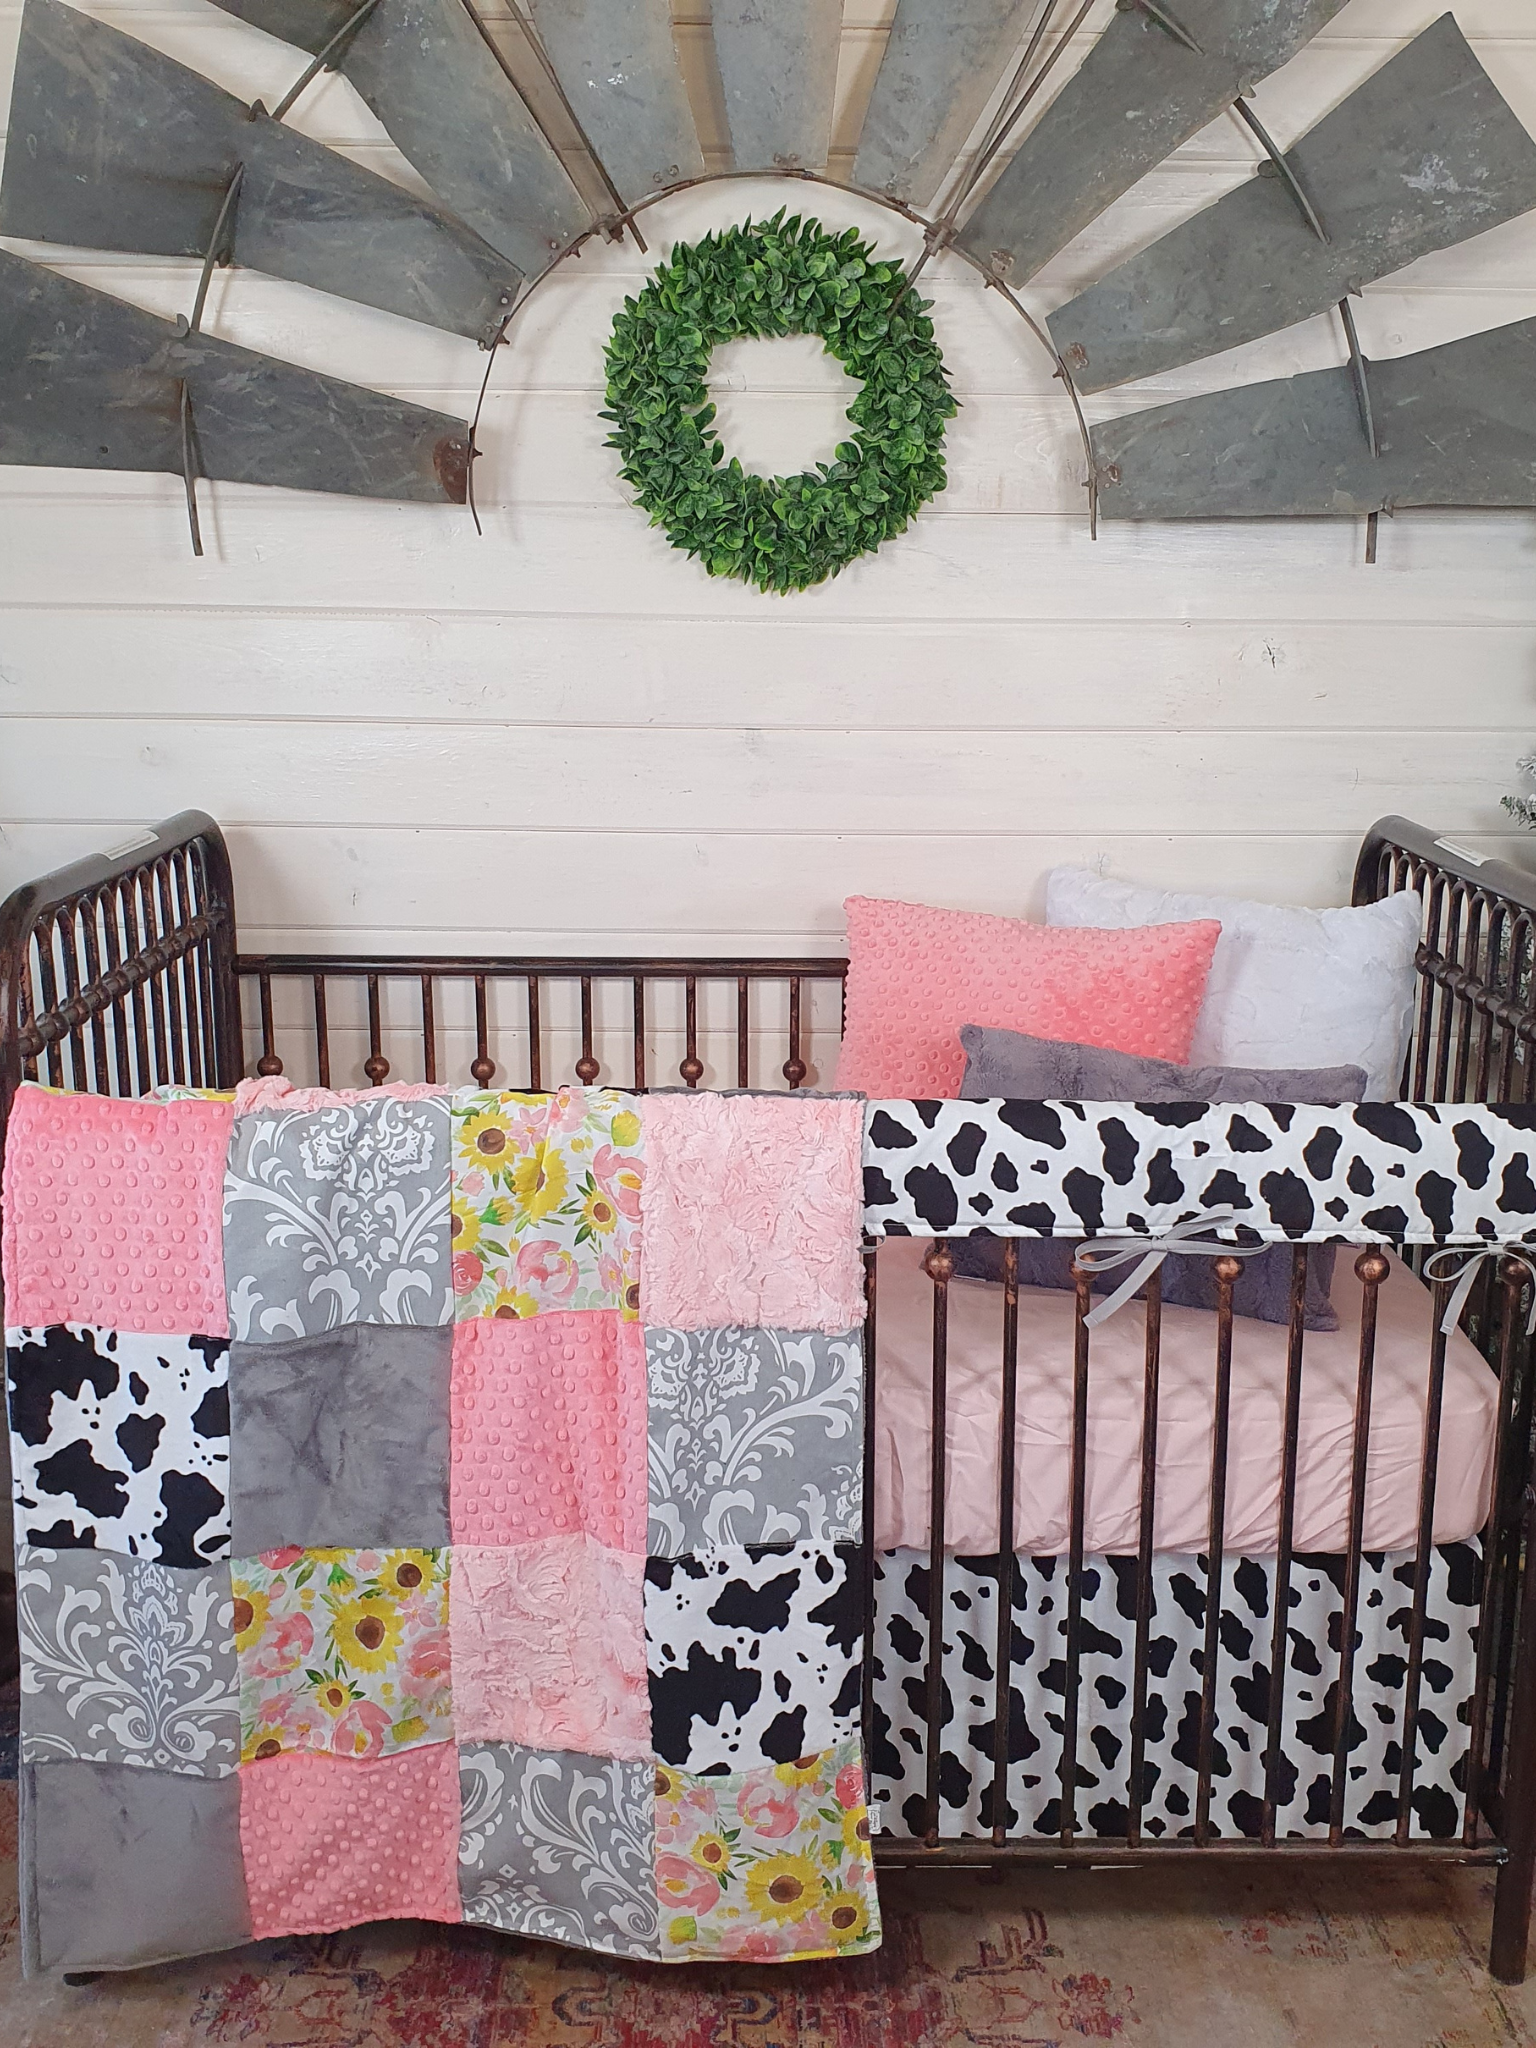 Girl Crib Bedding - Sunflower Rose and Black White Cow Minky Farm Baby Bedding Collection - DBC Baby Bedding Co 